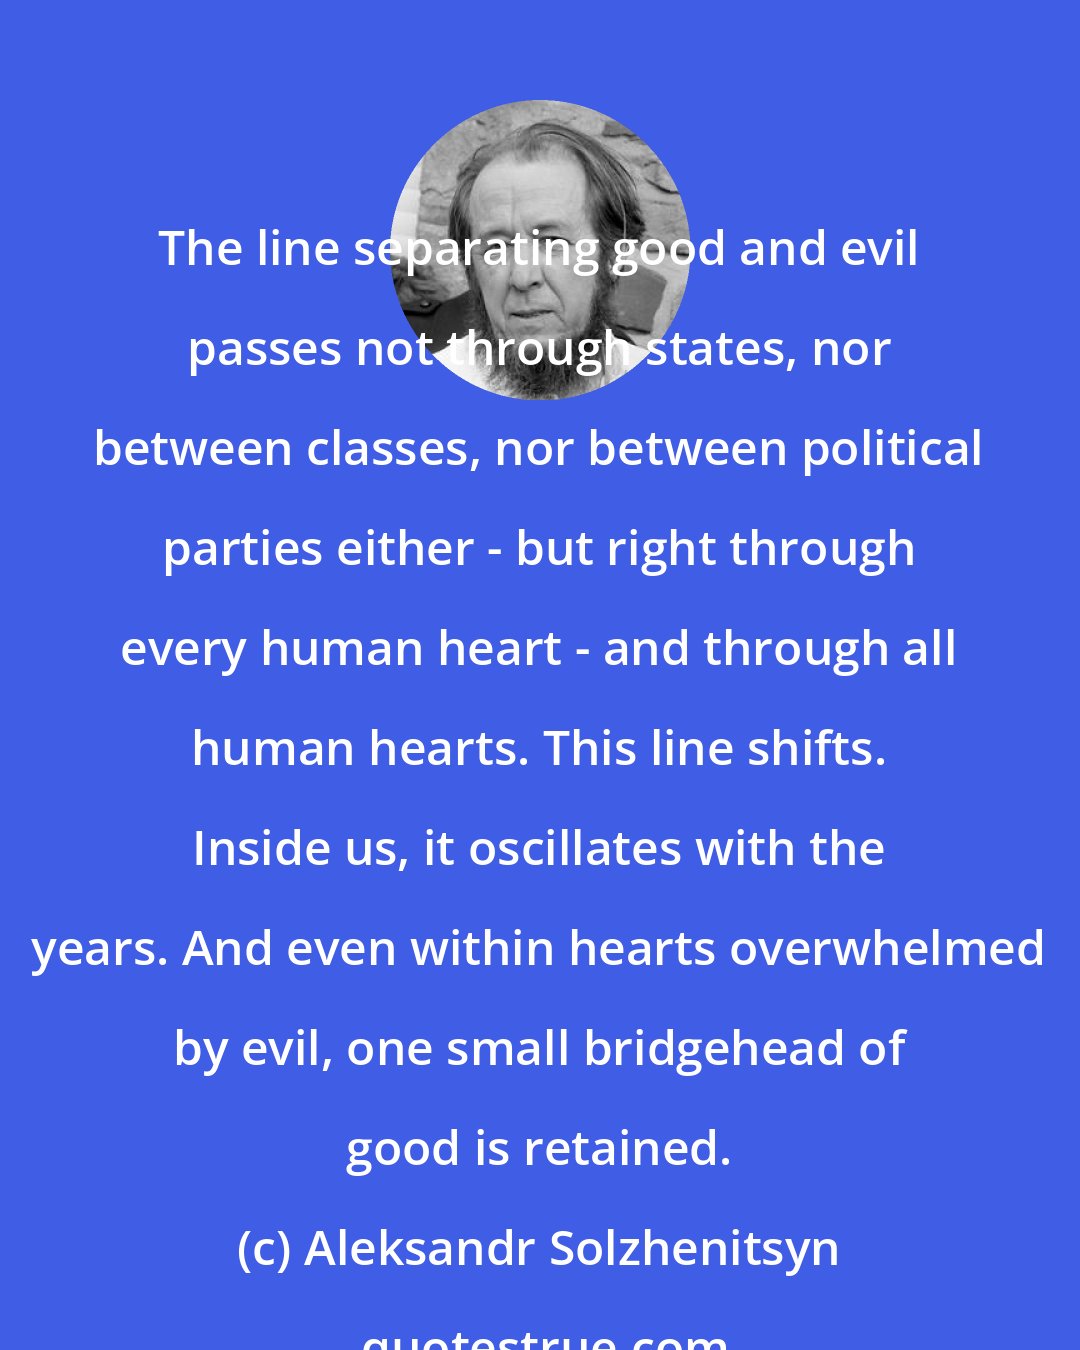 Aleksandr Solzhenitsyn: The line separating good and evil passes not through states, nor between classes, nor between political parties either - but right through every human heart - and through all human hearts. This line shifts. Inside us, it oscillates with the years. And even within hearts overwhelmed by evil, one small bridgehead of good is retained.